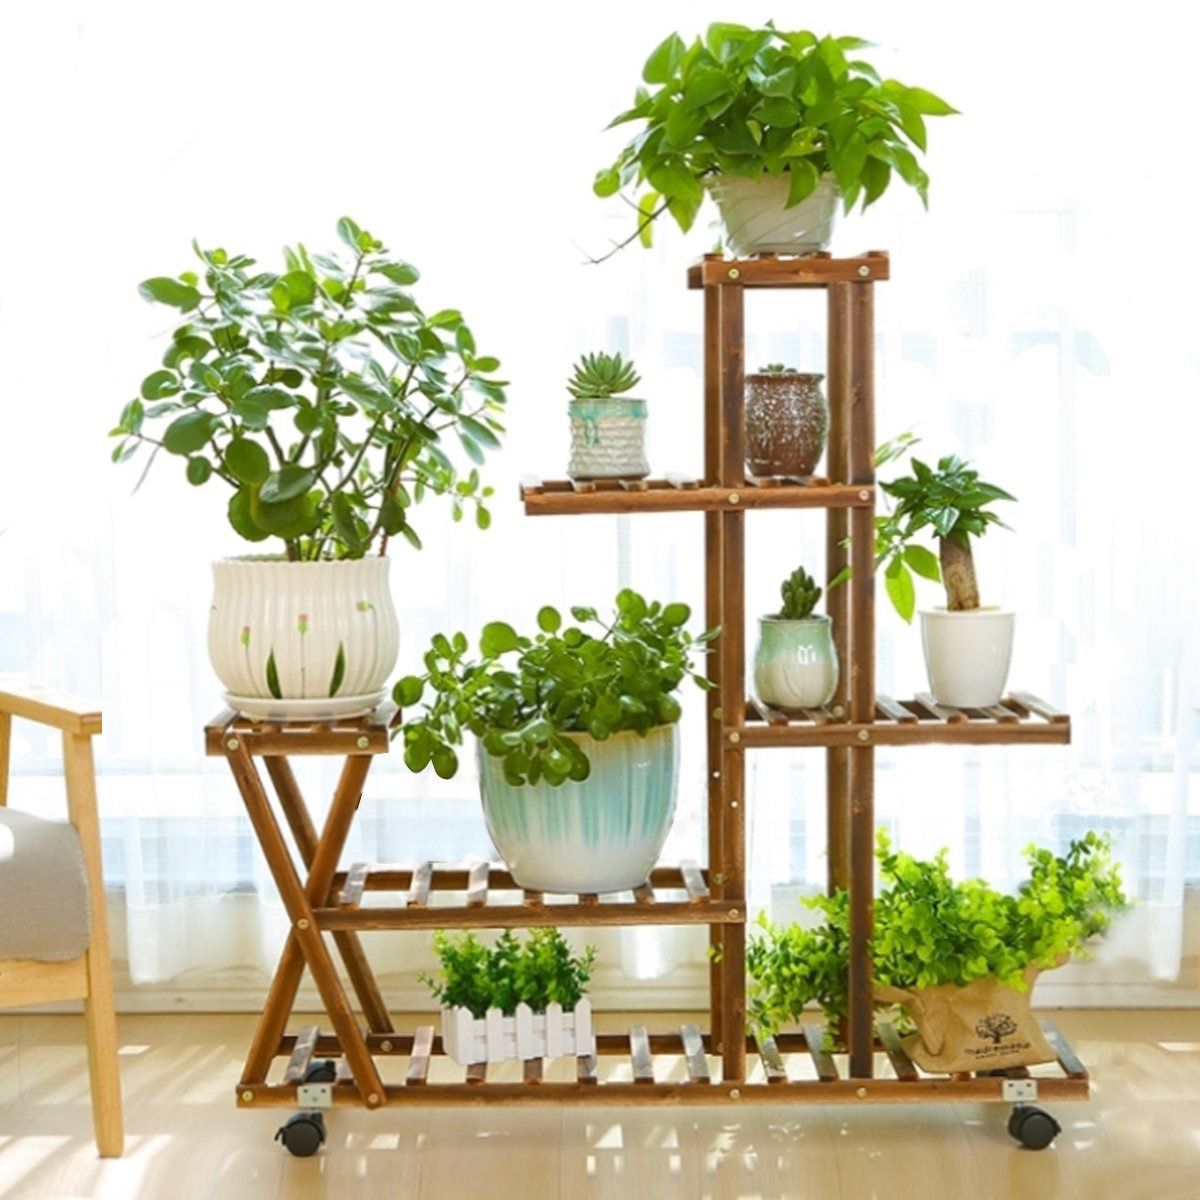 Wooden Flower Plant Stand 4-Layer Bamboo Flower Pot Display Stand Shelf with Wheels for Living Room Balcony Patio Yard Indoors or Outdoors